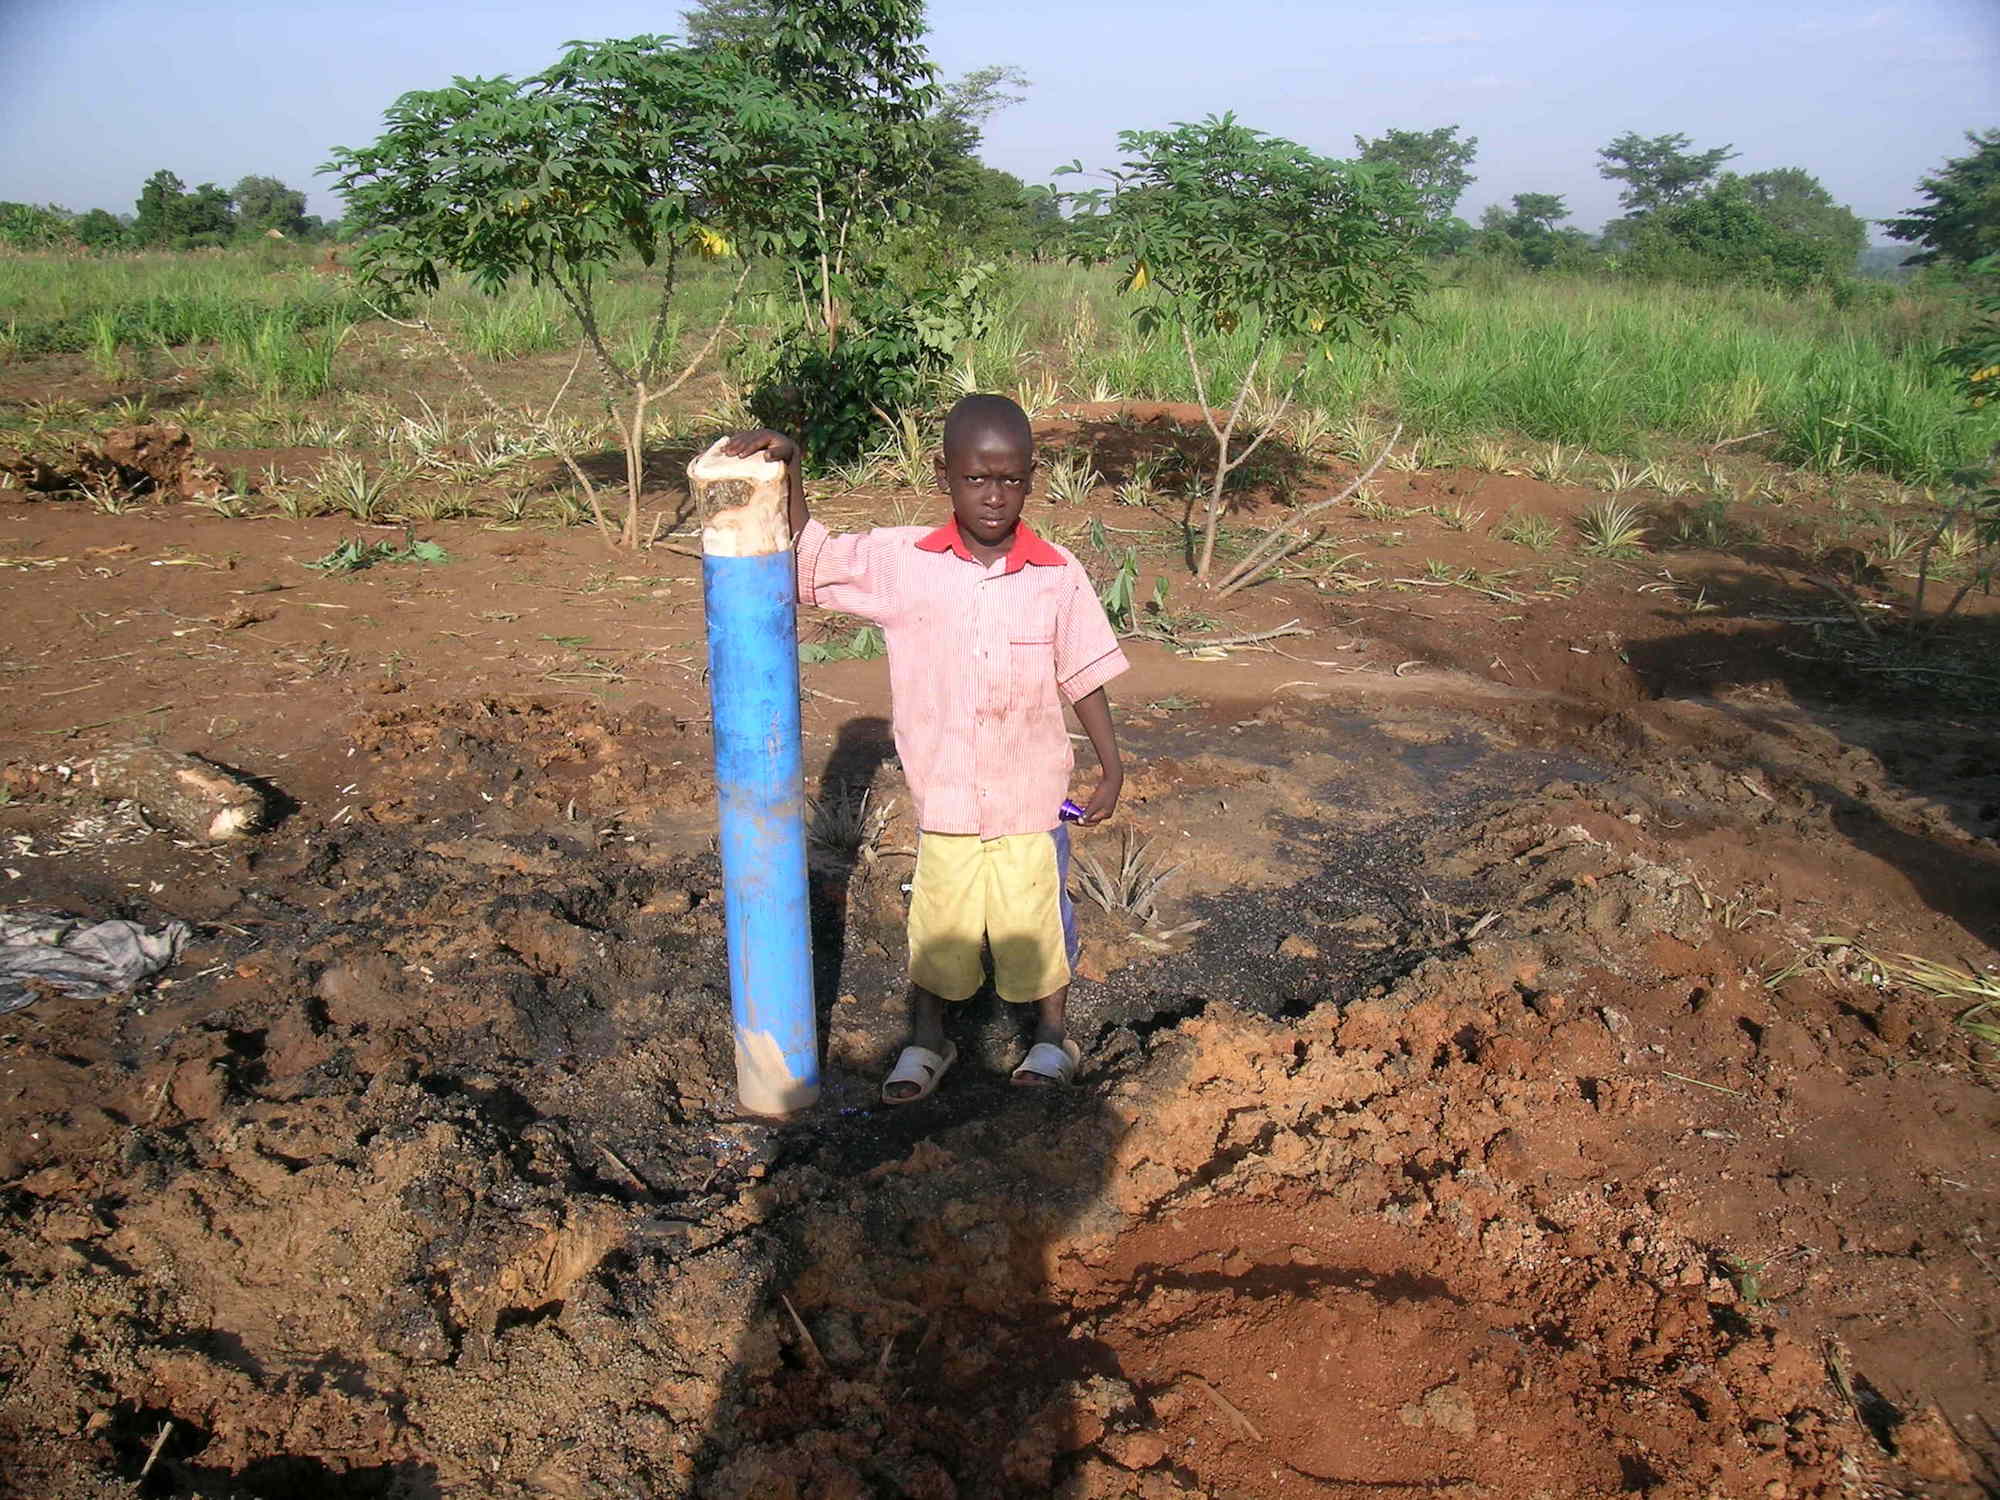 Young boy standing at pump site